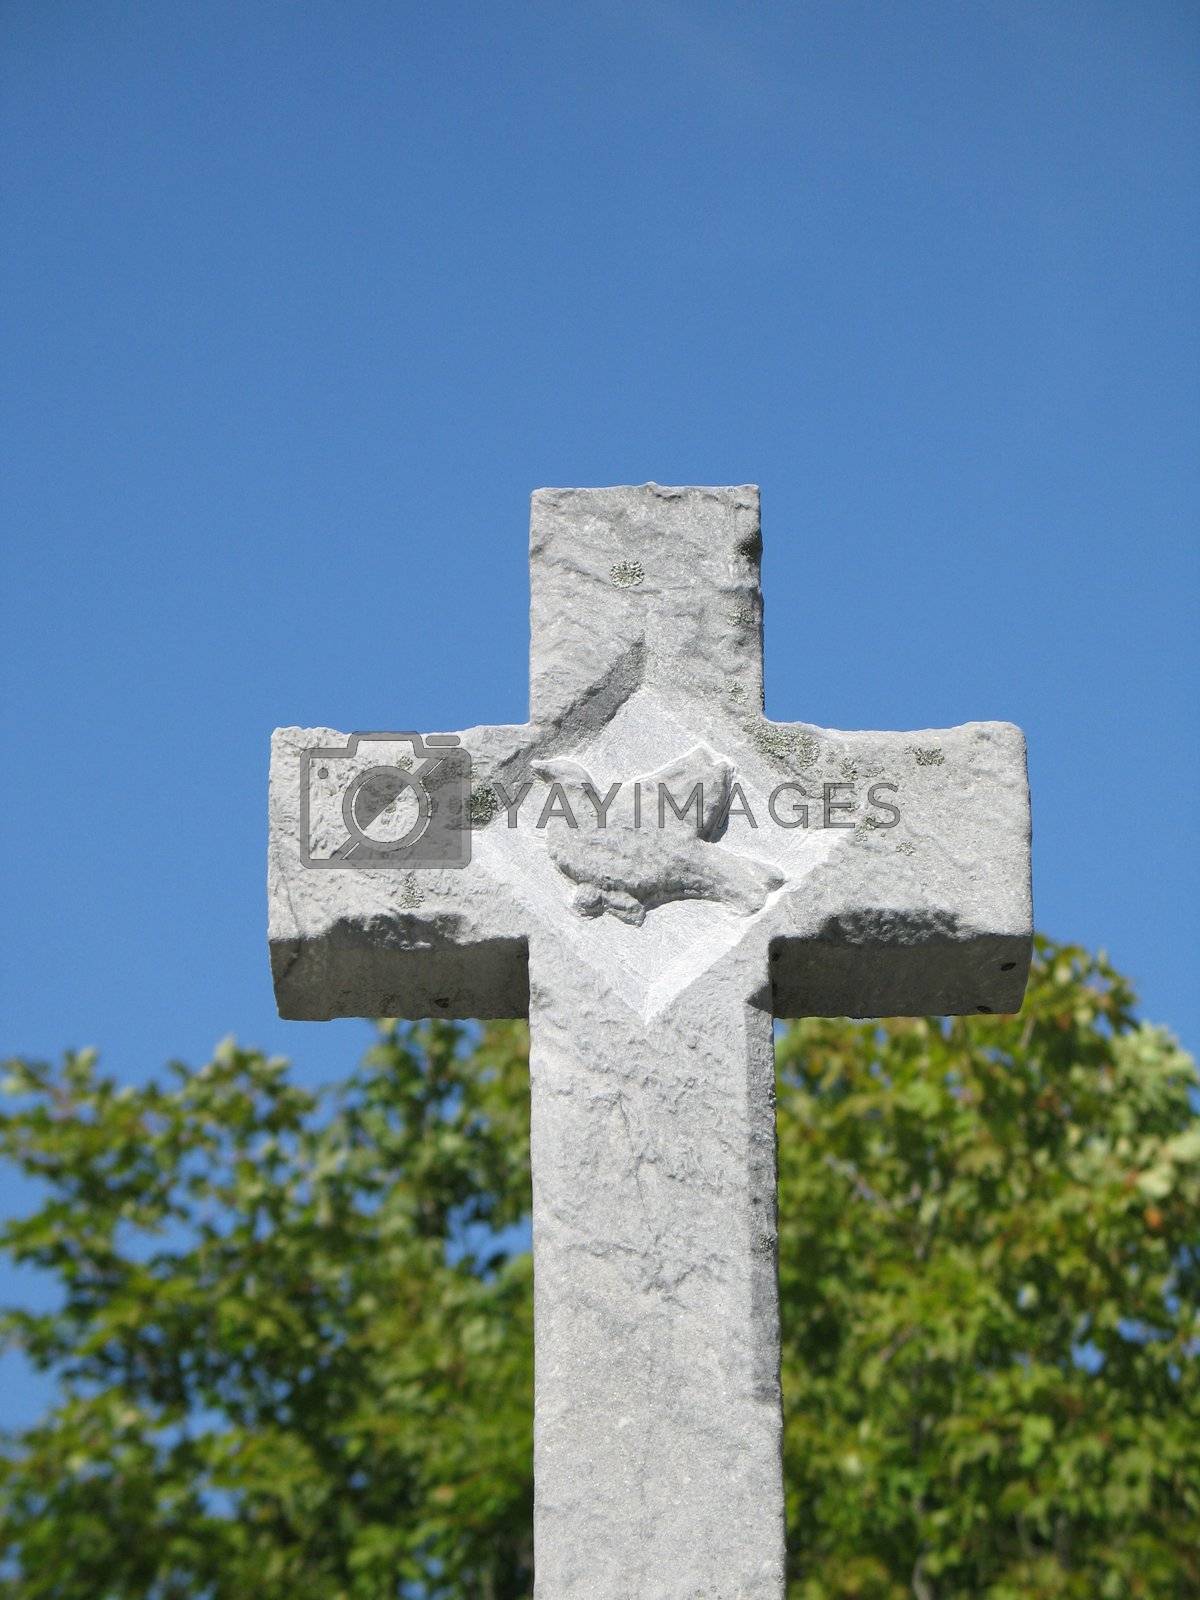 Royalty free image of a stone cross by mmm